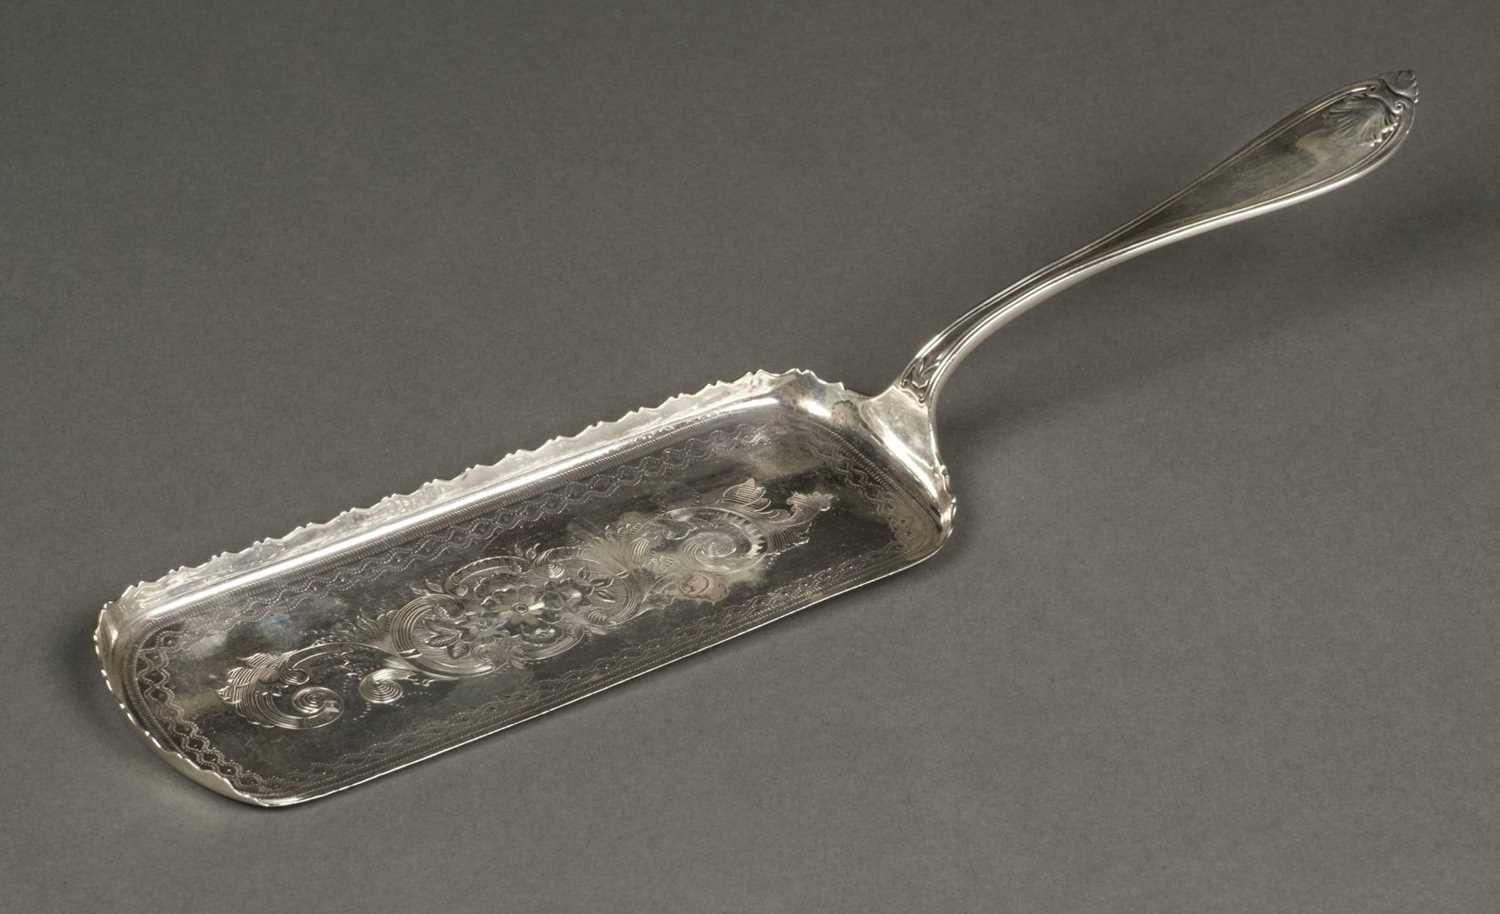 Lot 1 - American Silver. A pastry server by William Adams & Co, New York circa 1835